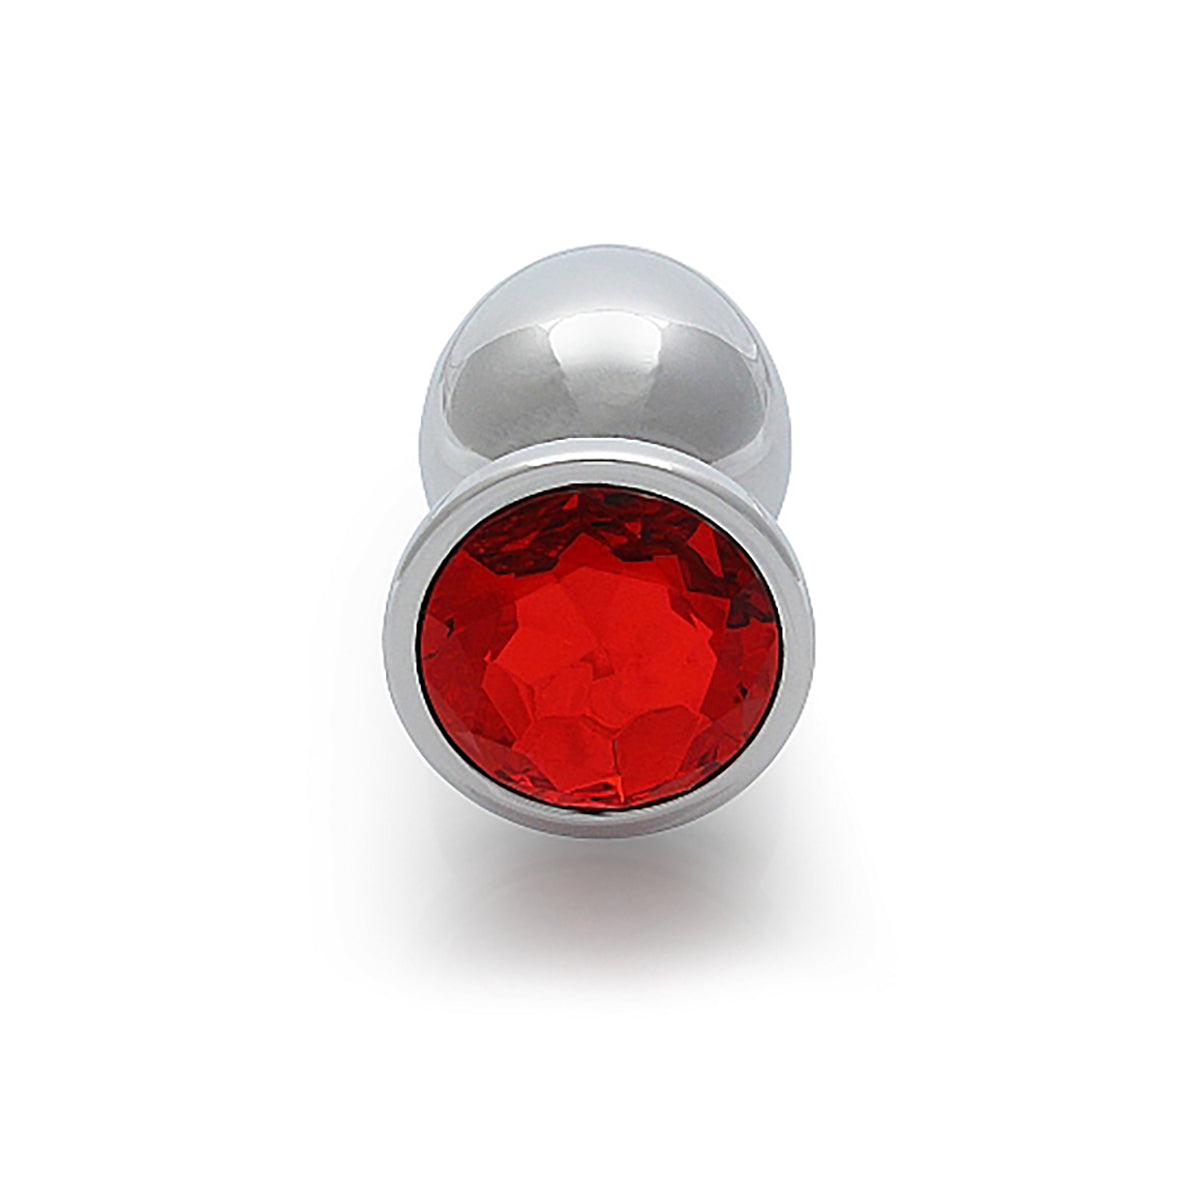 Shots Ouch! Round Gem Butt Plug Large - Silver/Ruby Red Large